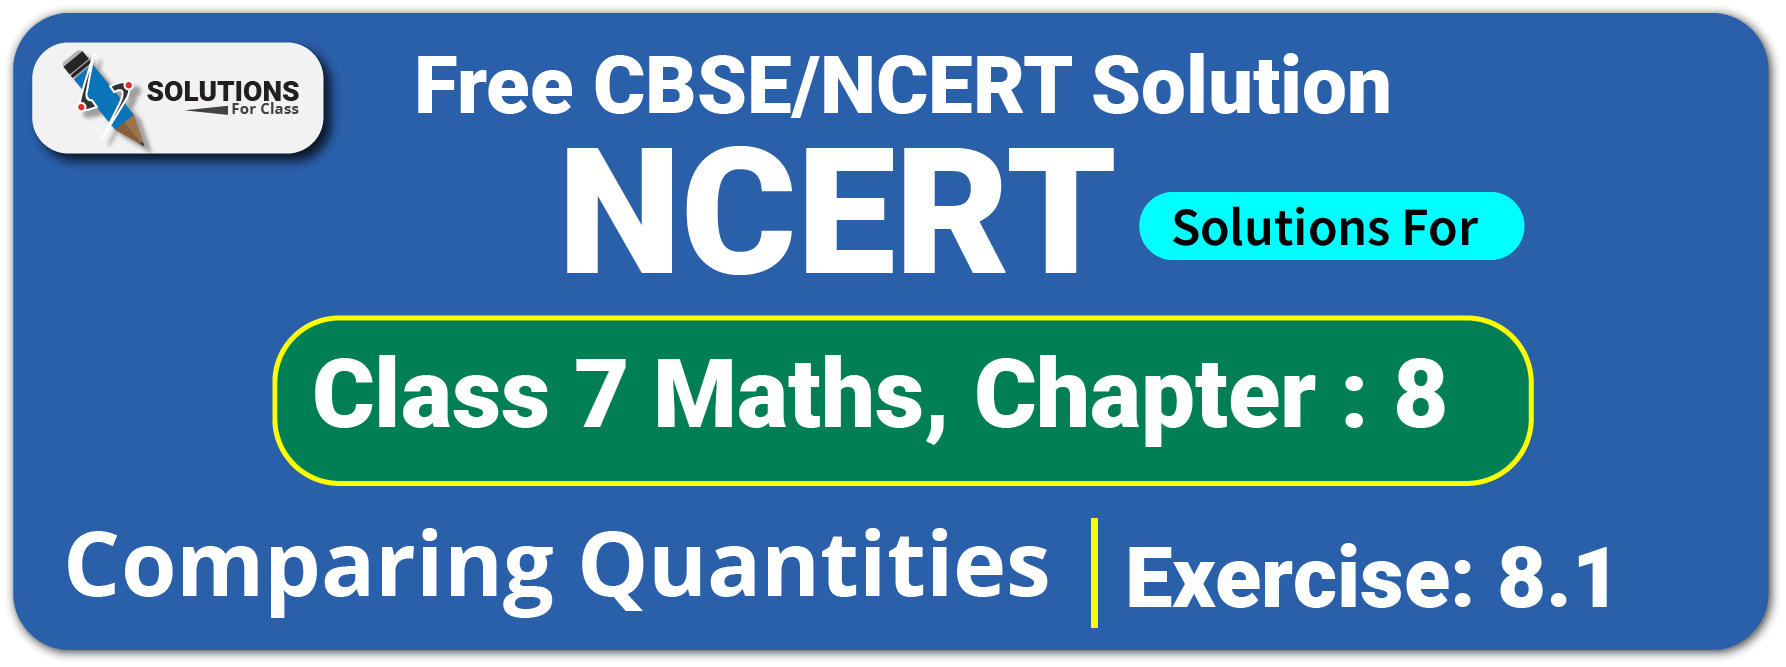 NCERT Solutions For Class 7 Maths Chapter 8, Comparing Quantities, Exercise 8.1